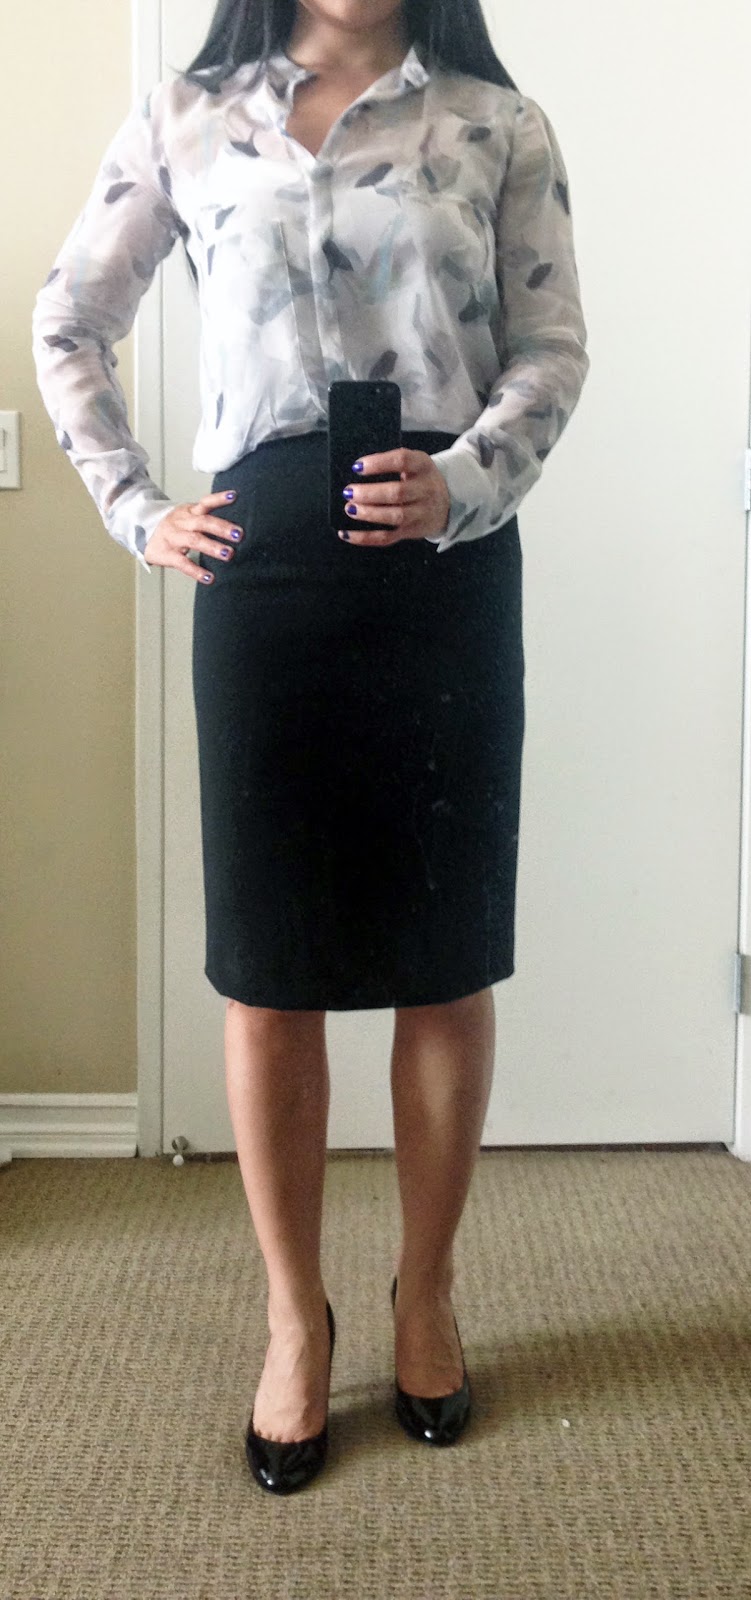 My Superficial Endeavors: Theory Suit & Blouse!